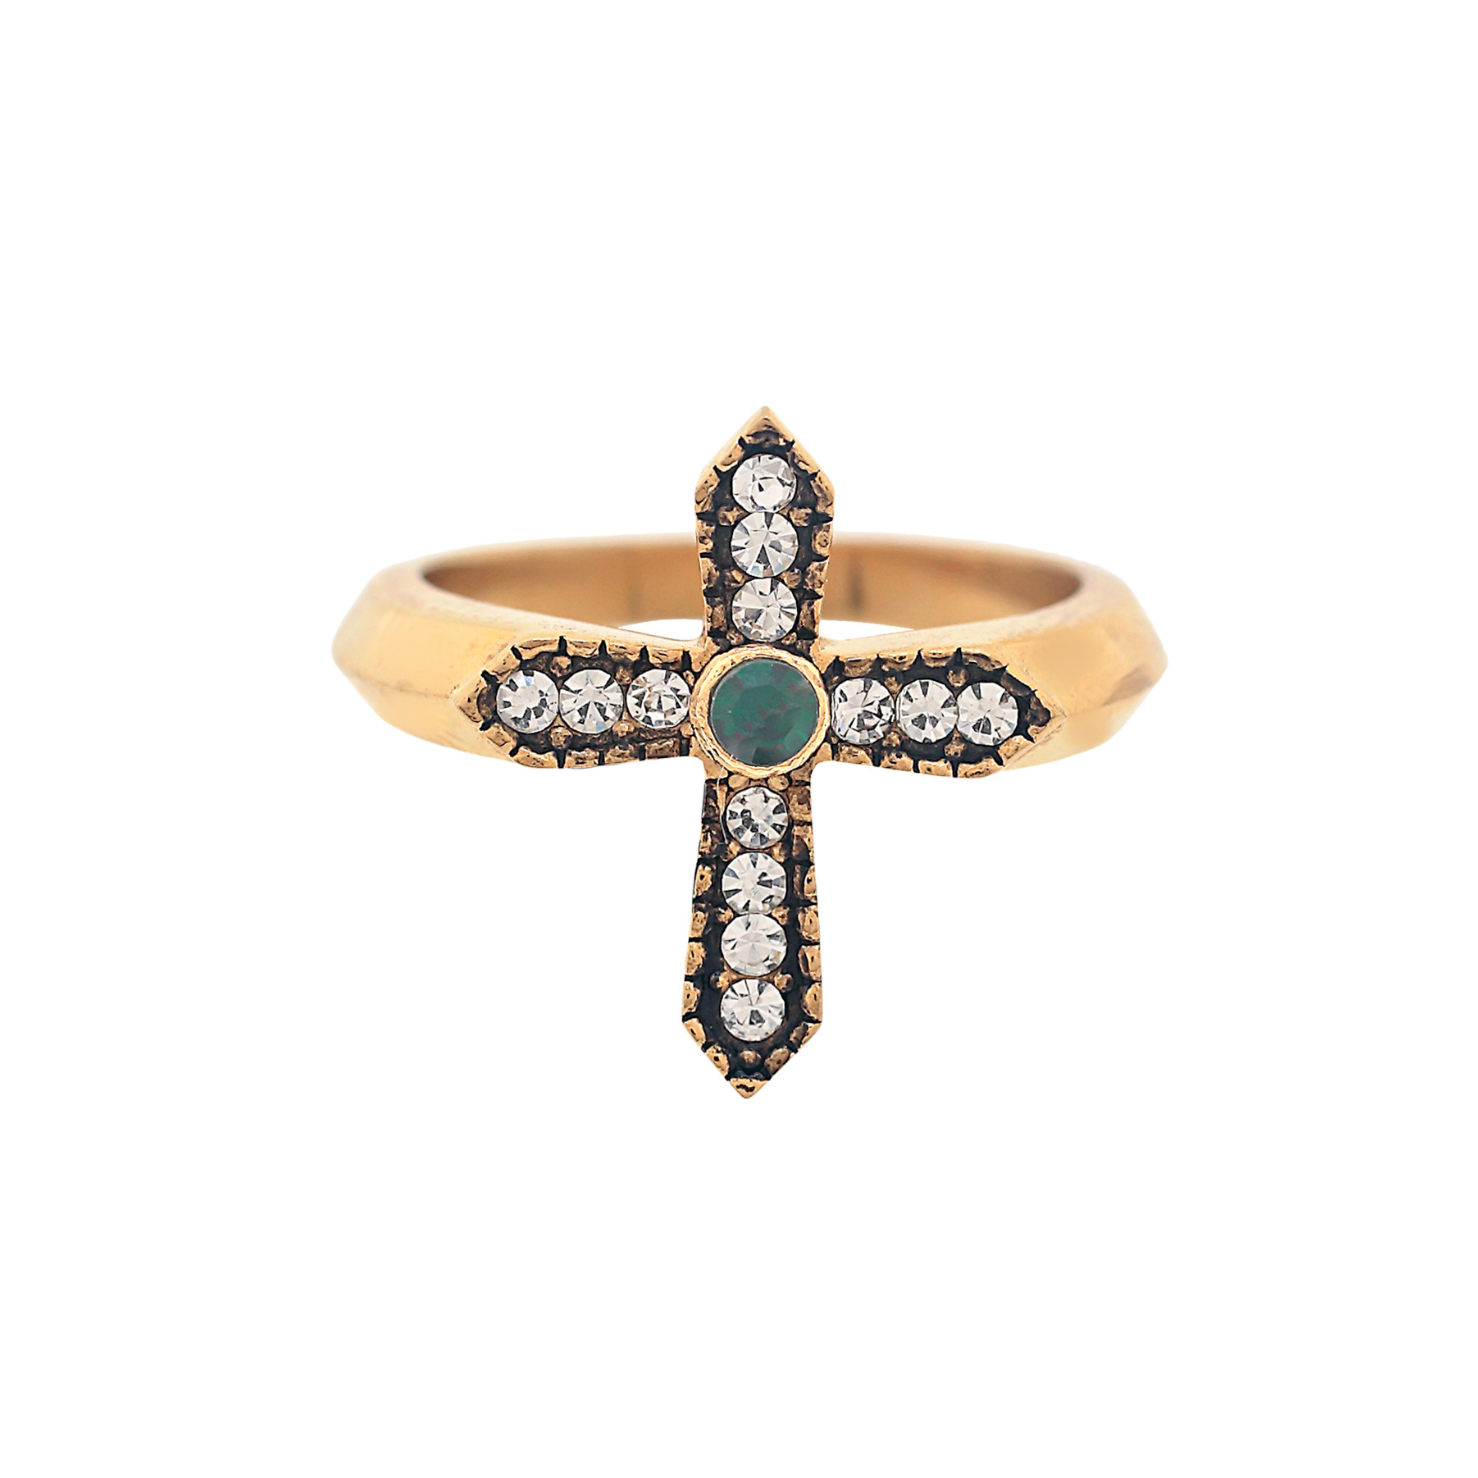 'RING WITH CROSS Cz STONES'